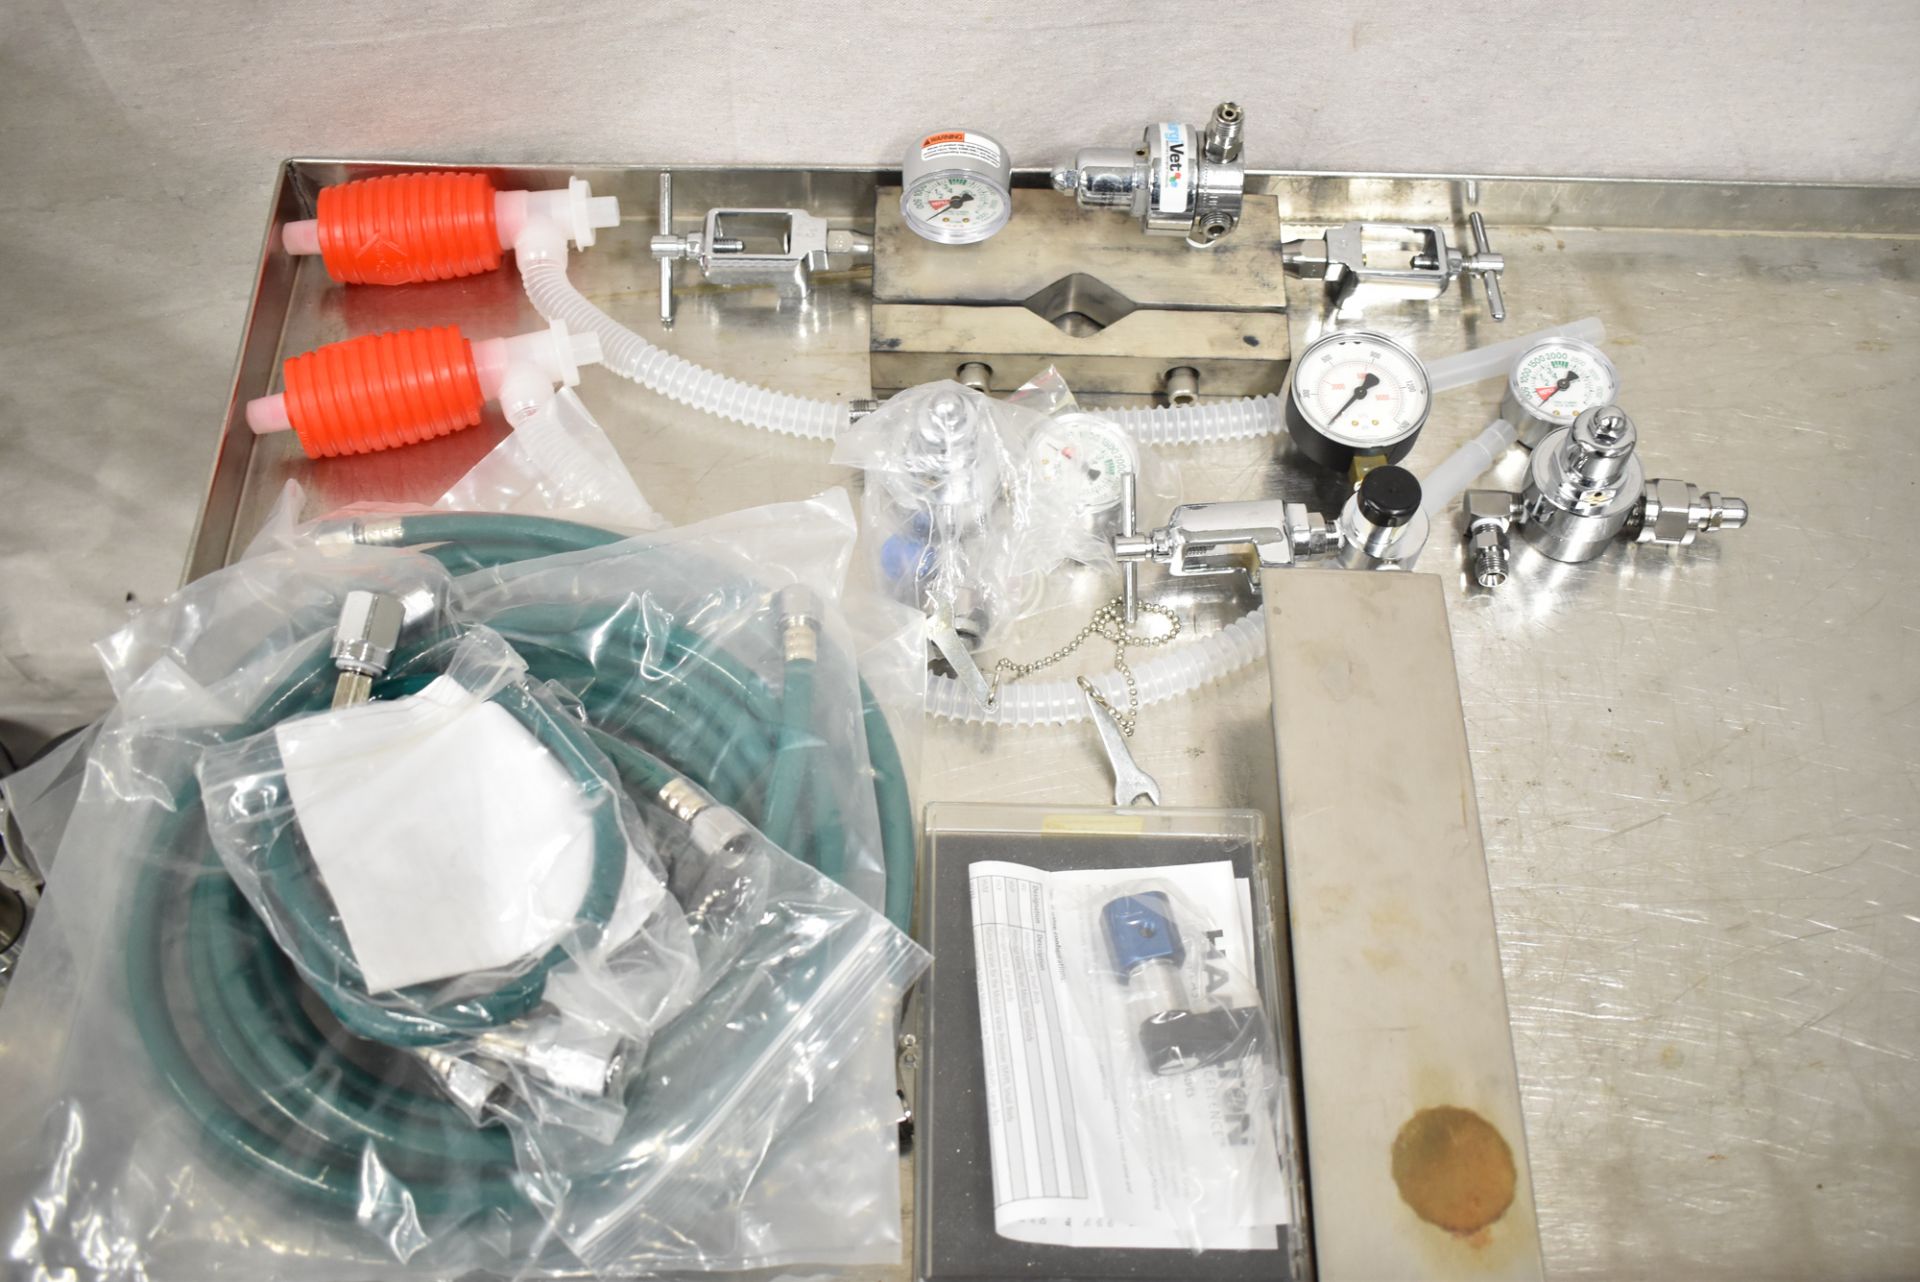 RIVER MEDICAL ENGINEERING T3ISO ISOFLURANE VAPORIZER AND FLOW METER ANESTHESIA UNIT WITH HOSES, - Image 8 of 8